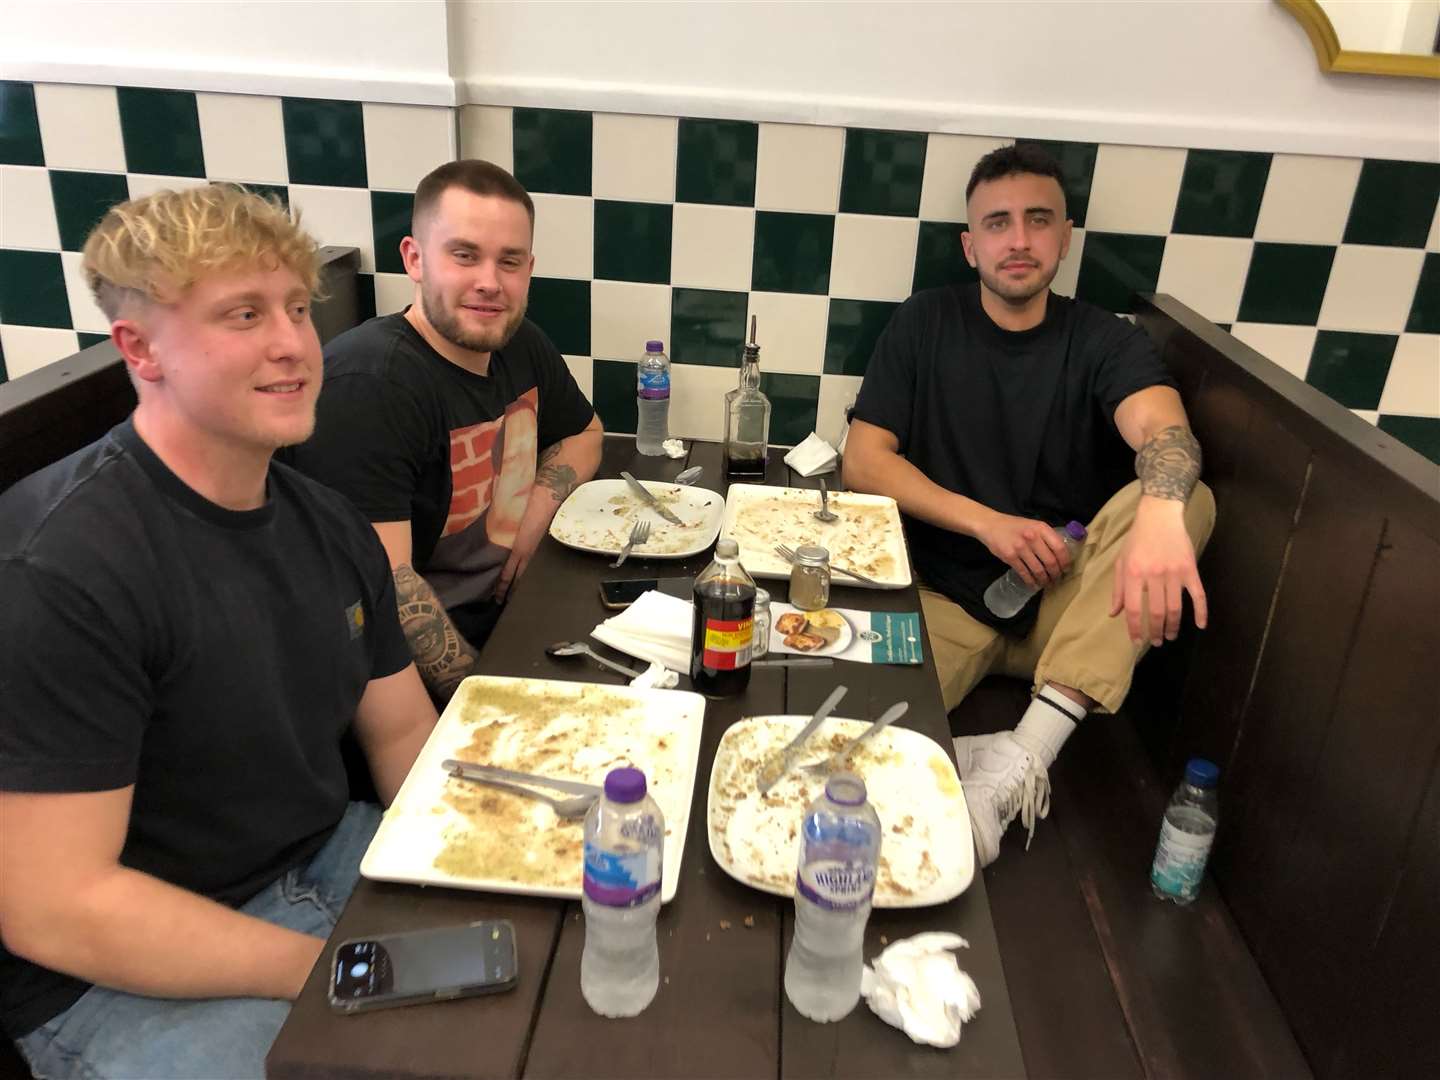 Three extremely smug looking friends who completed the five-pie challenge at Flo's in Folkestone